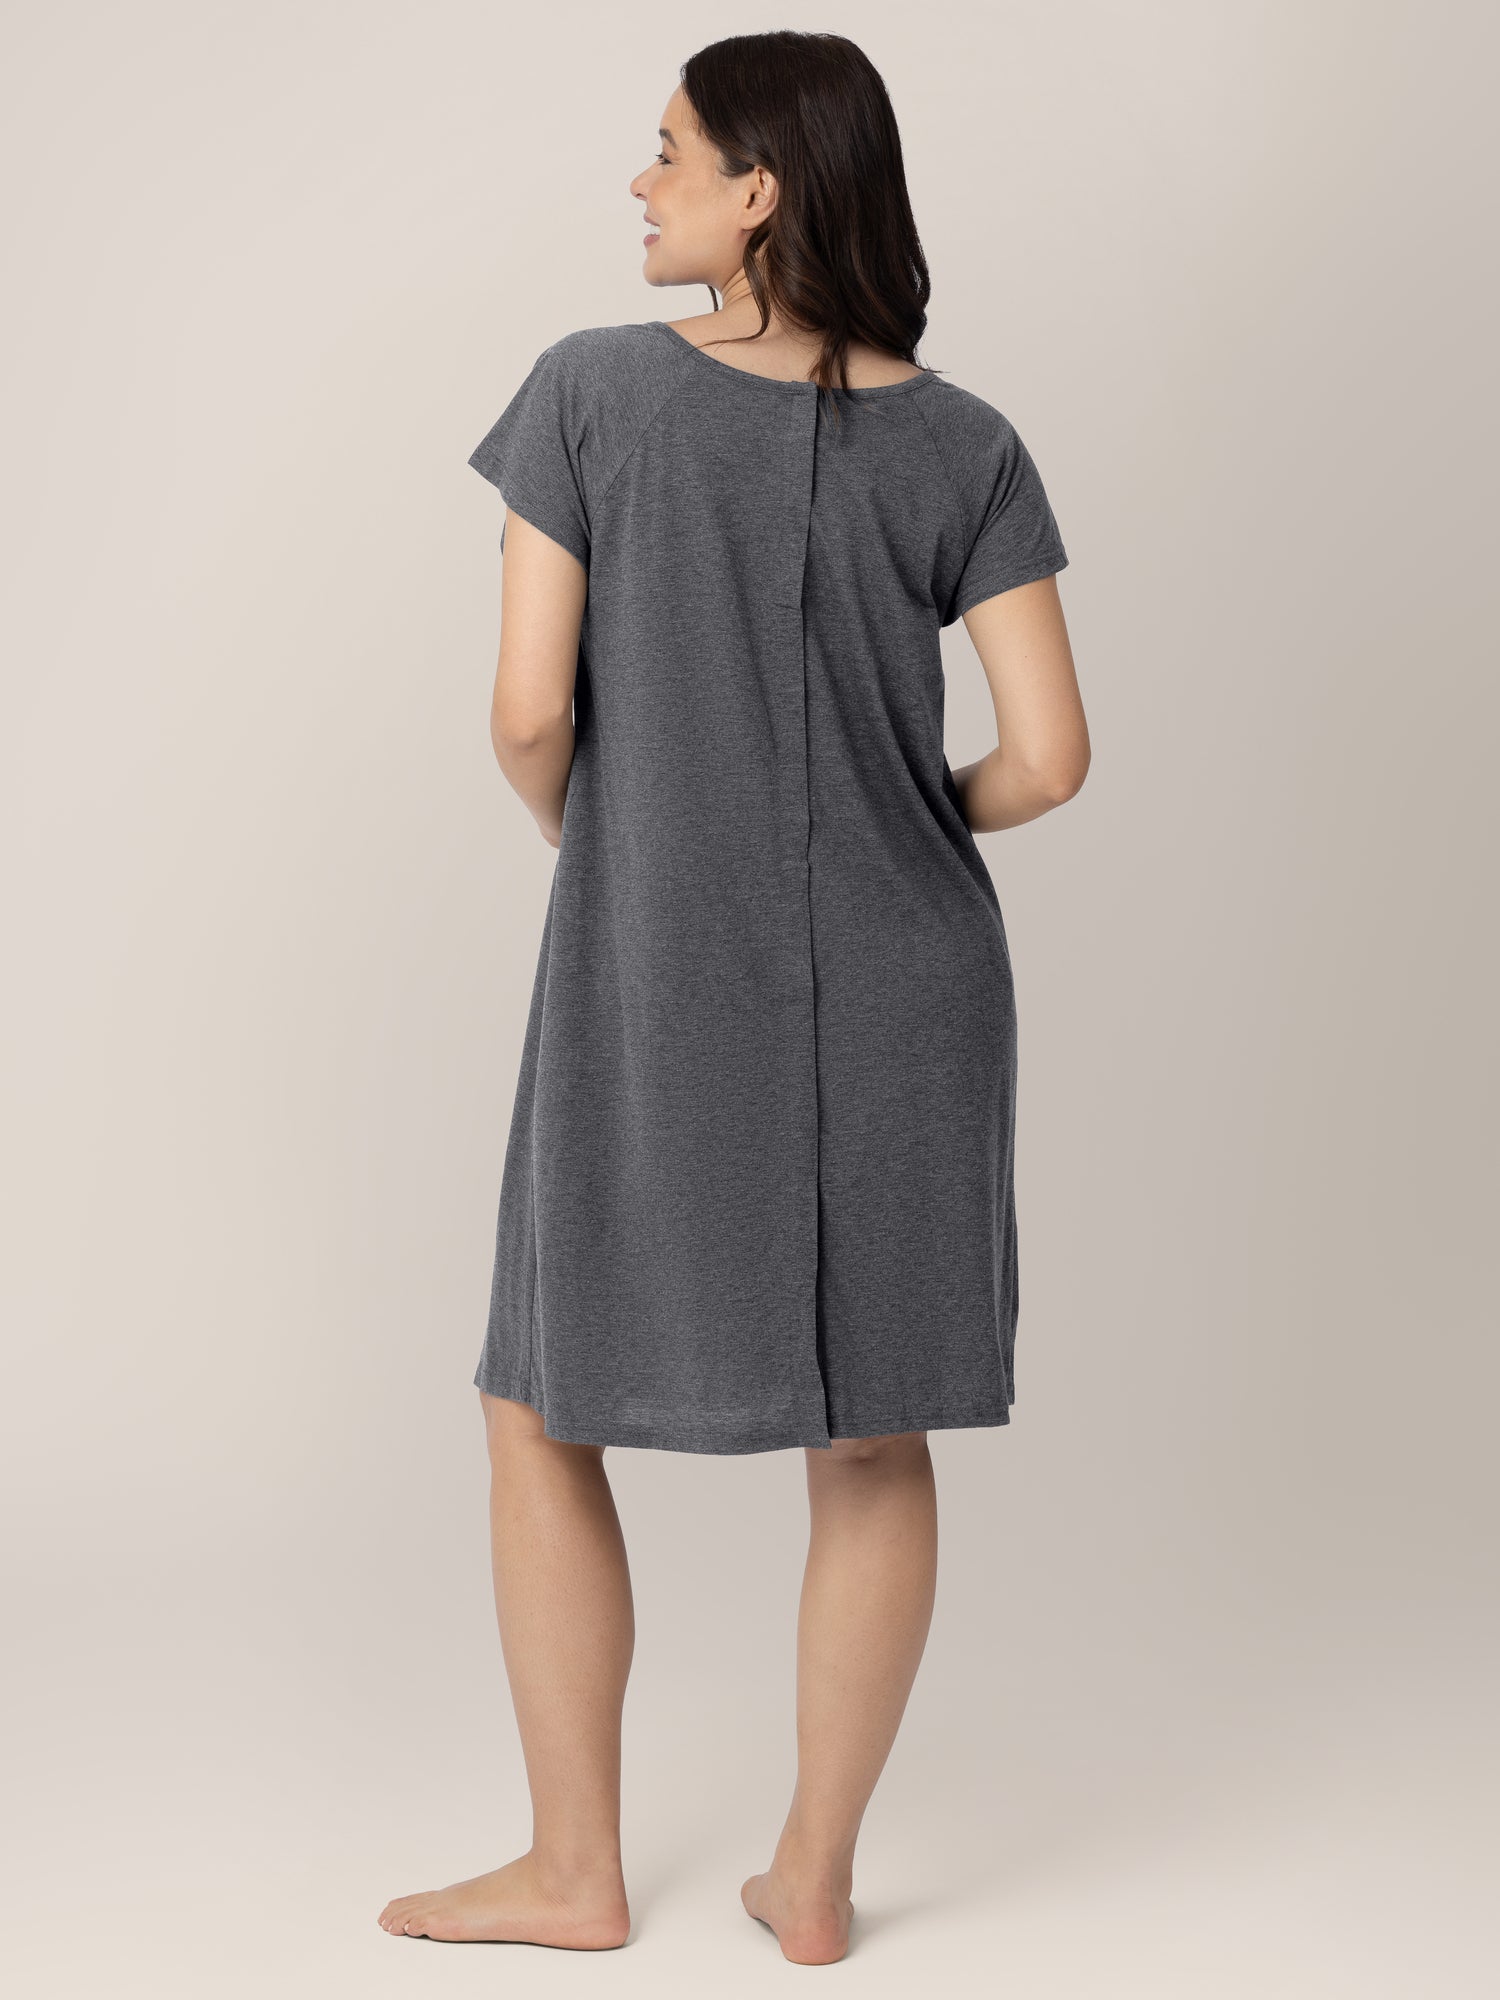 Back view of a model wearing the Universal Labor & Delivery Gown in Grey Heather